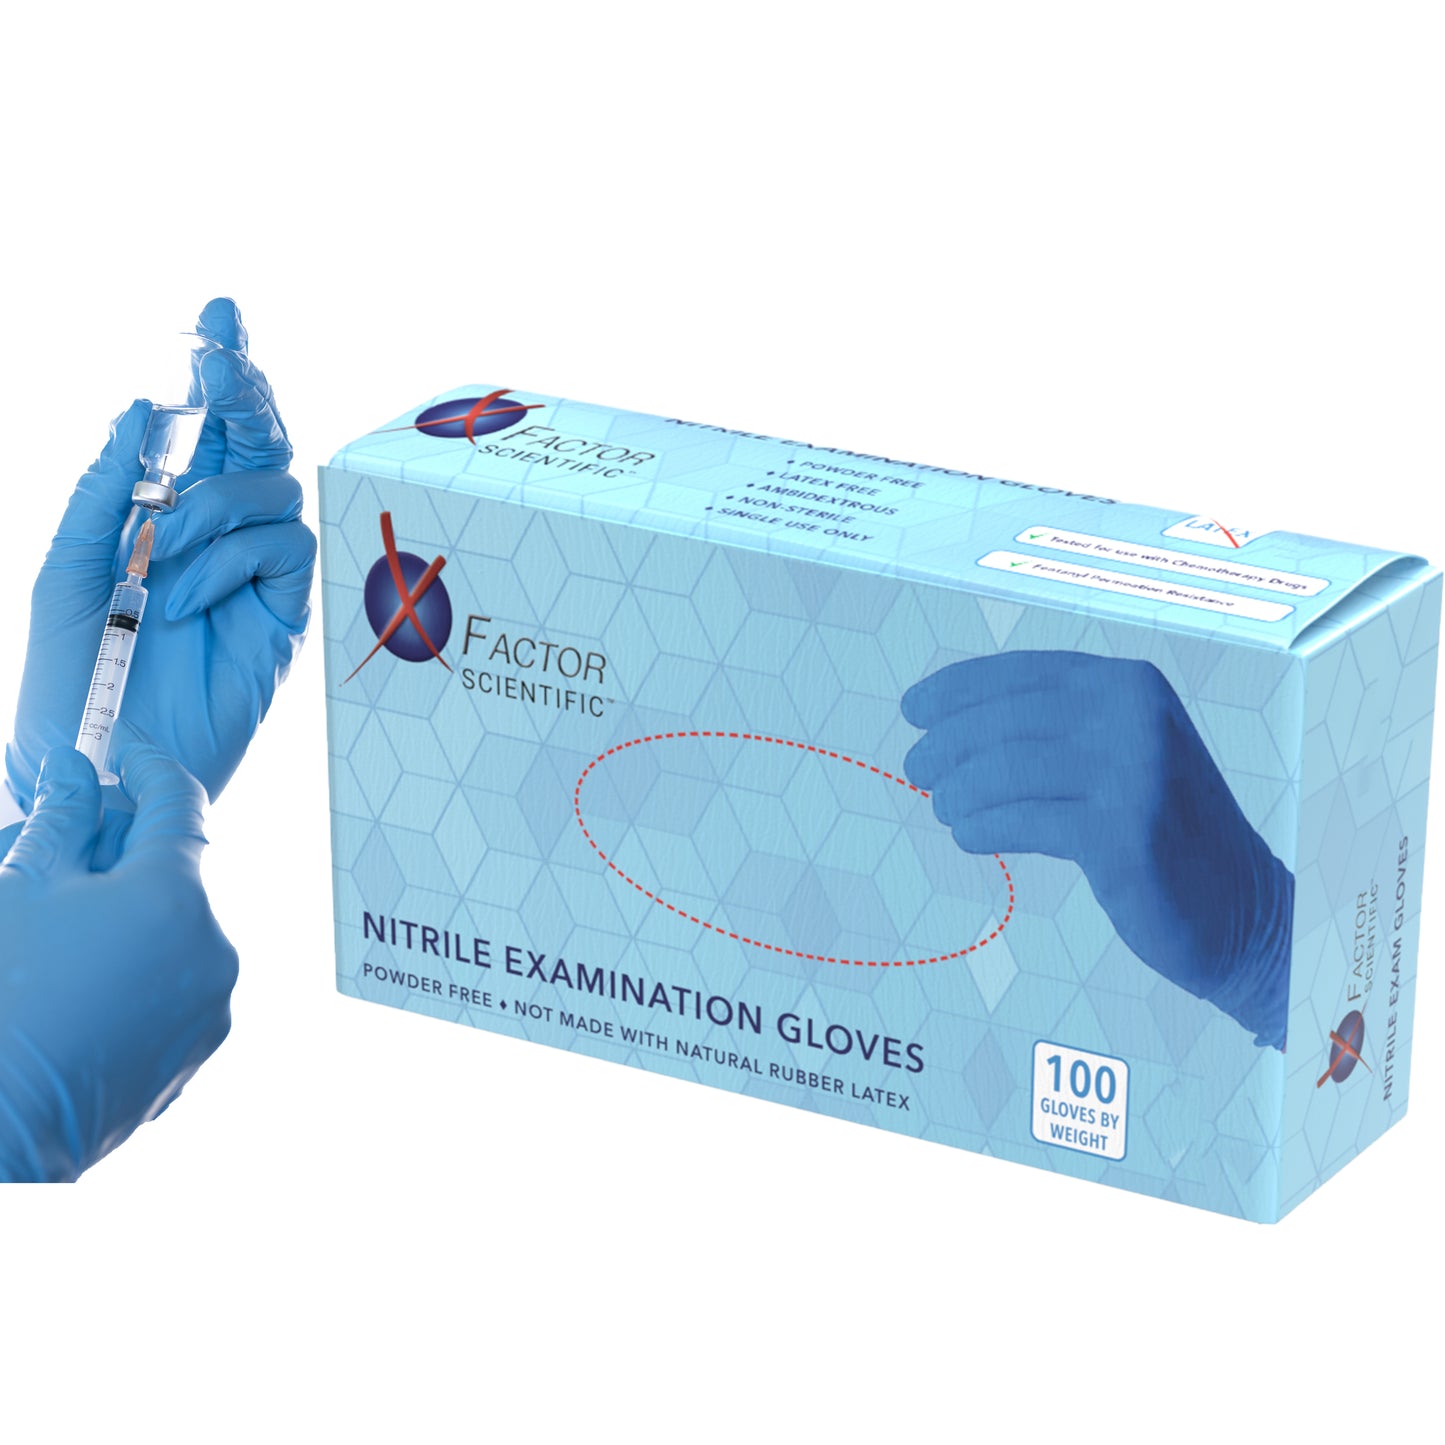 X Factor Exam Grade Nitrile Gloves for doctors and nurses